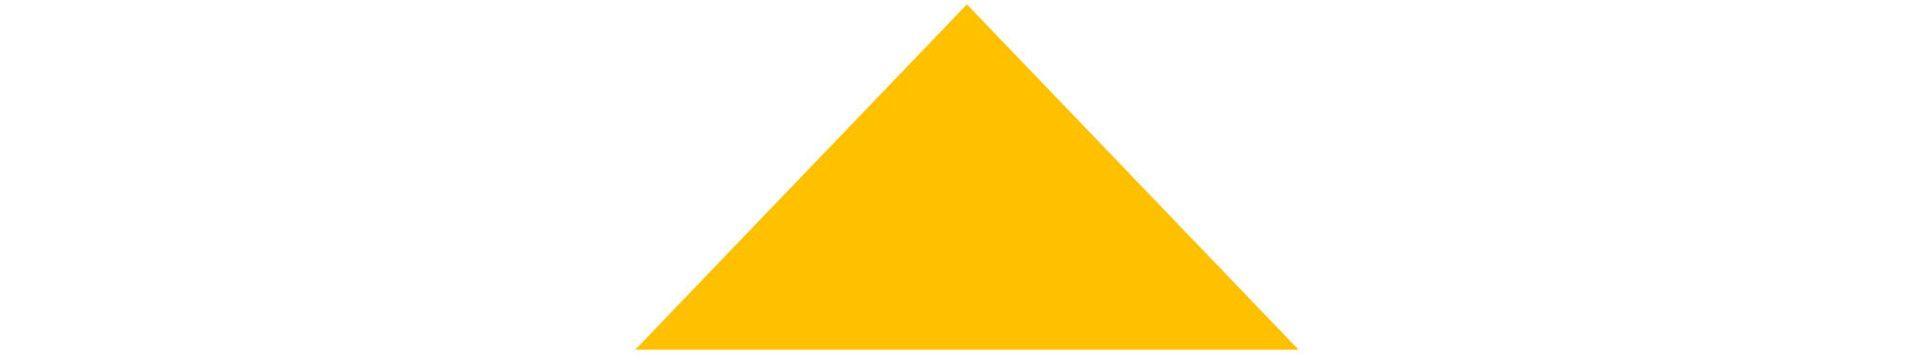 Yellow Triangle Logo - Caterpillar loses logo - Chiever Chiever